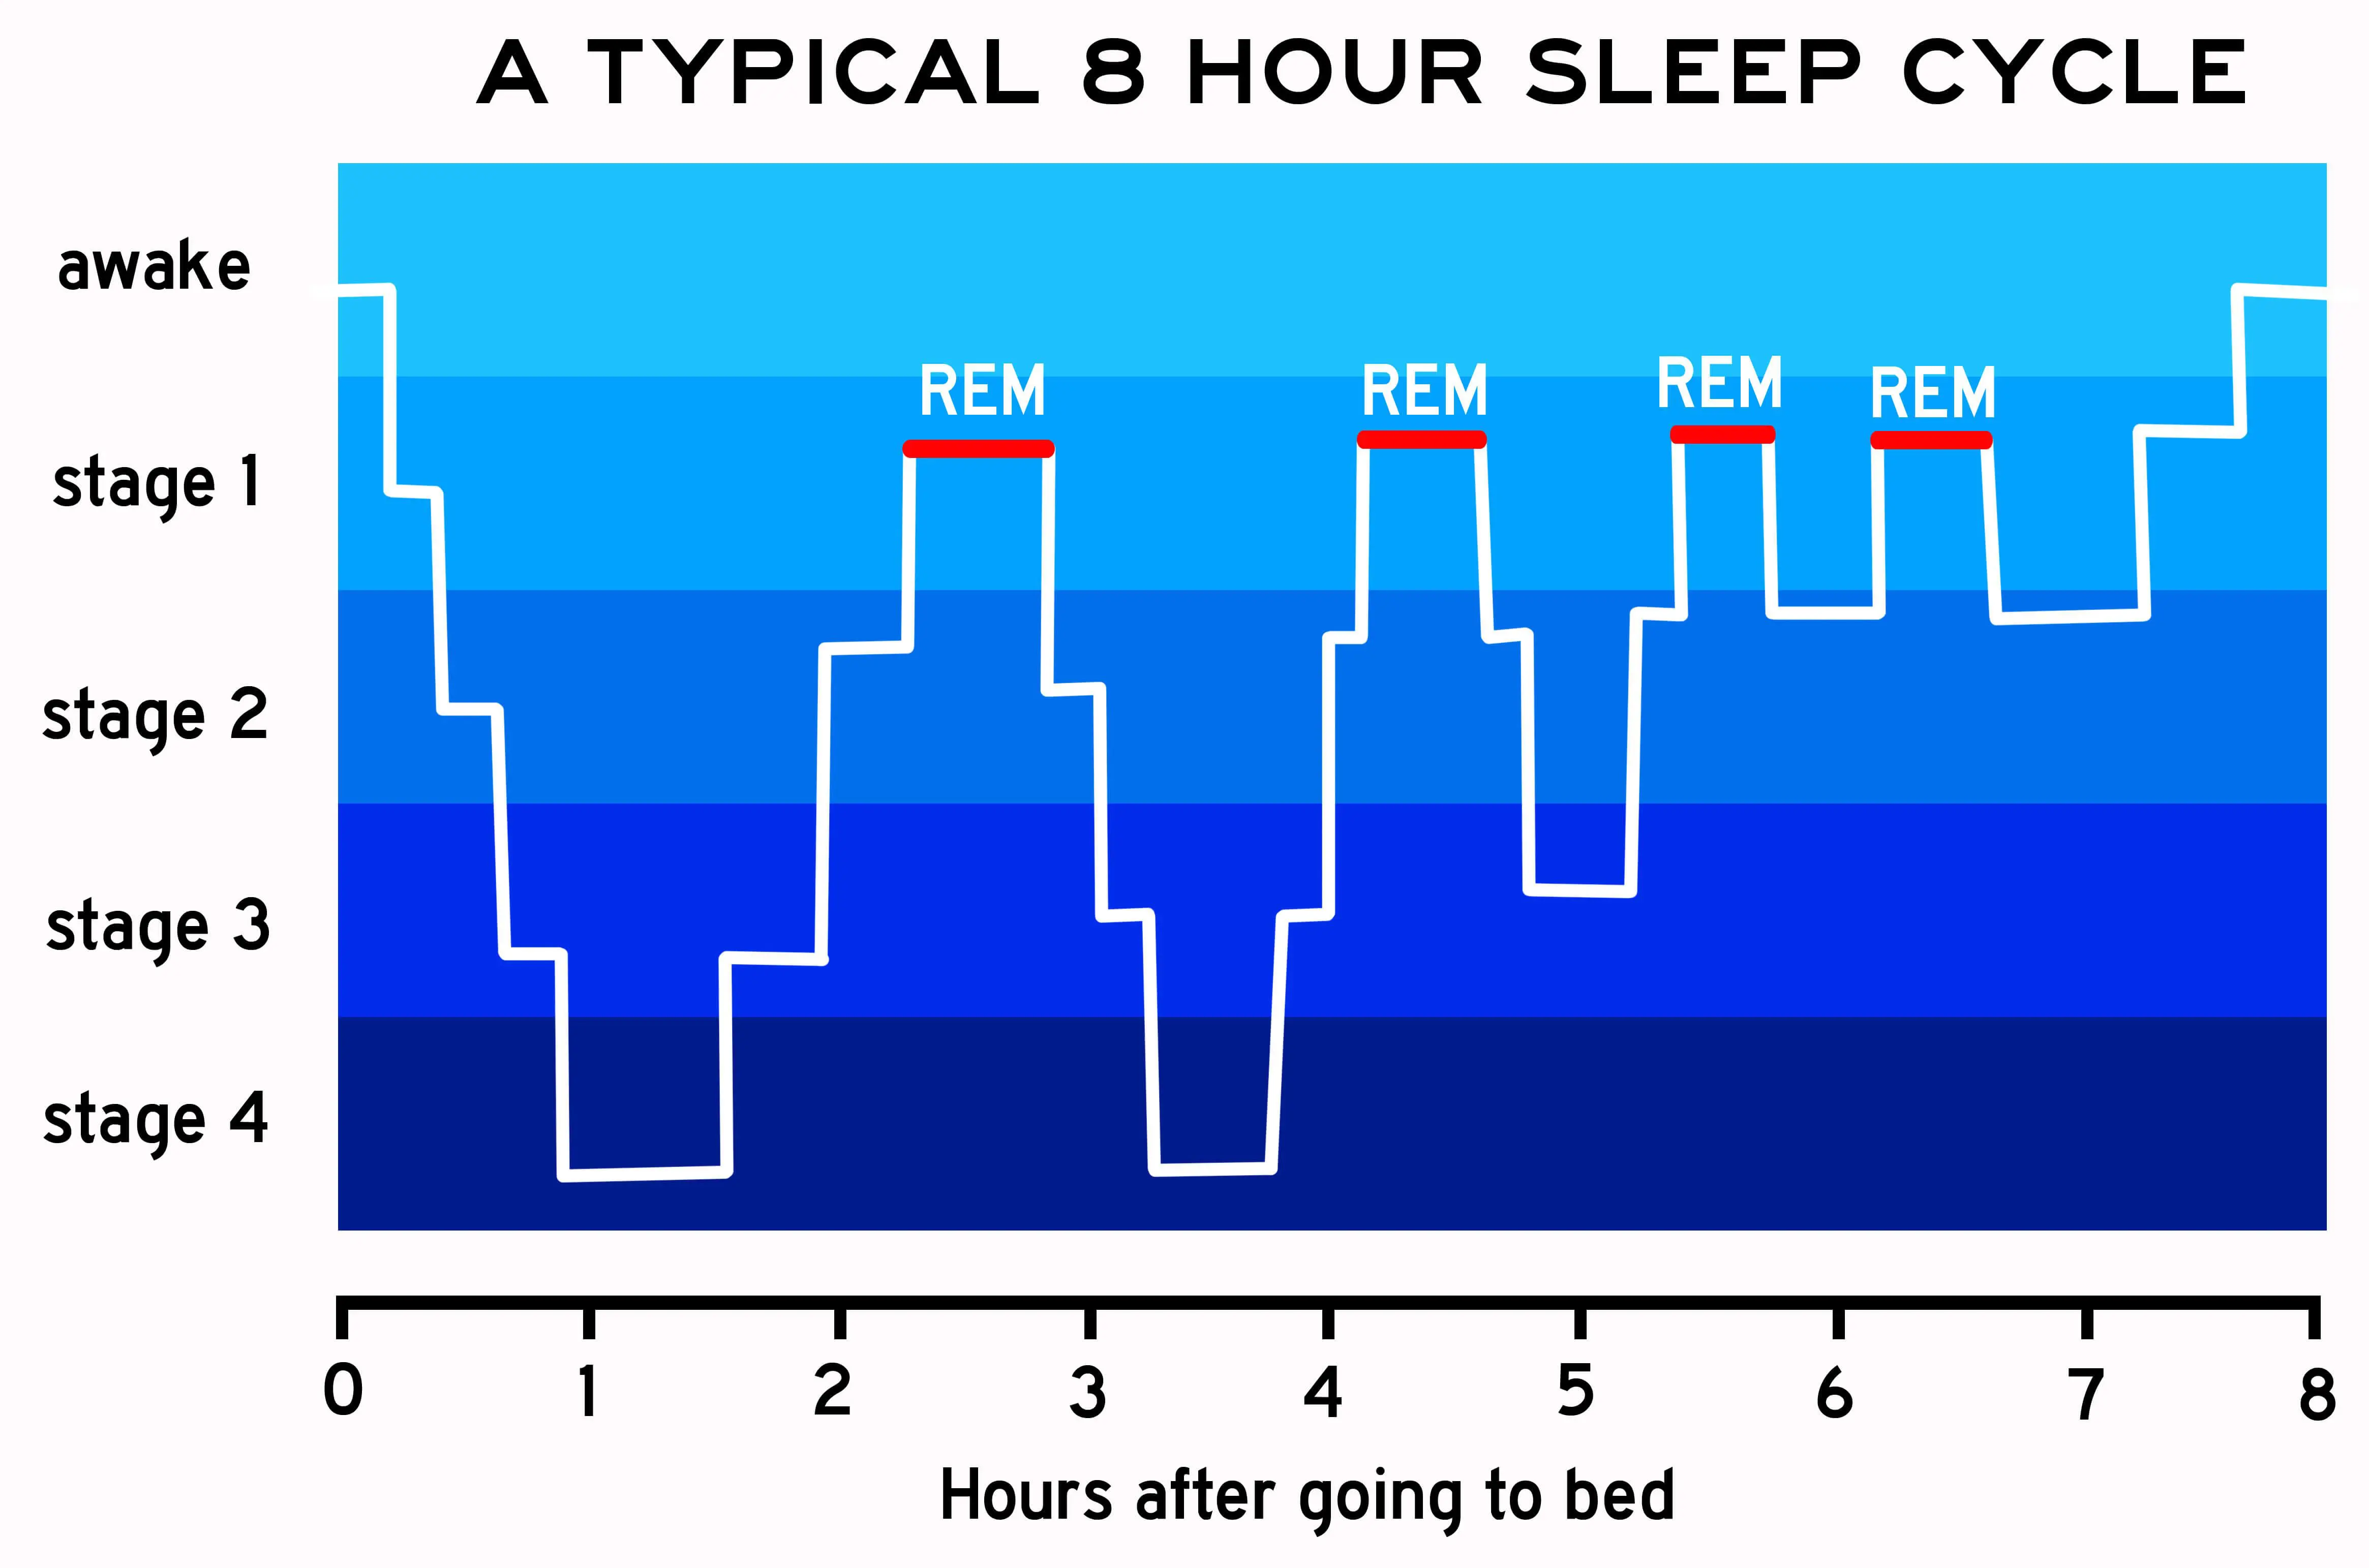 Individuals usually enter REM sleep multiple times a night.